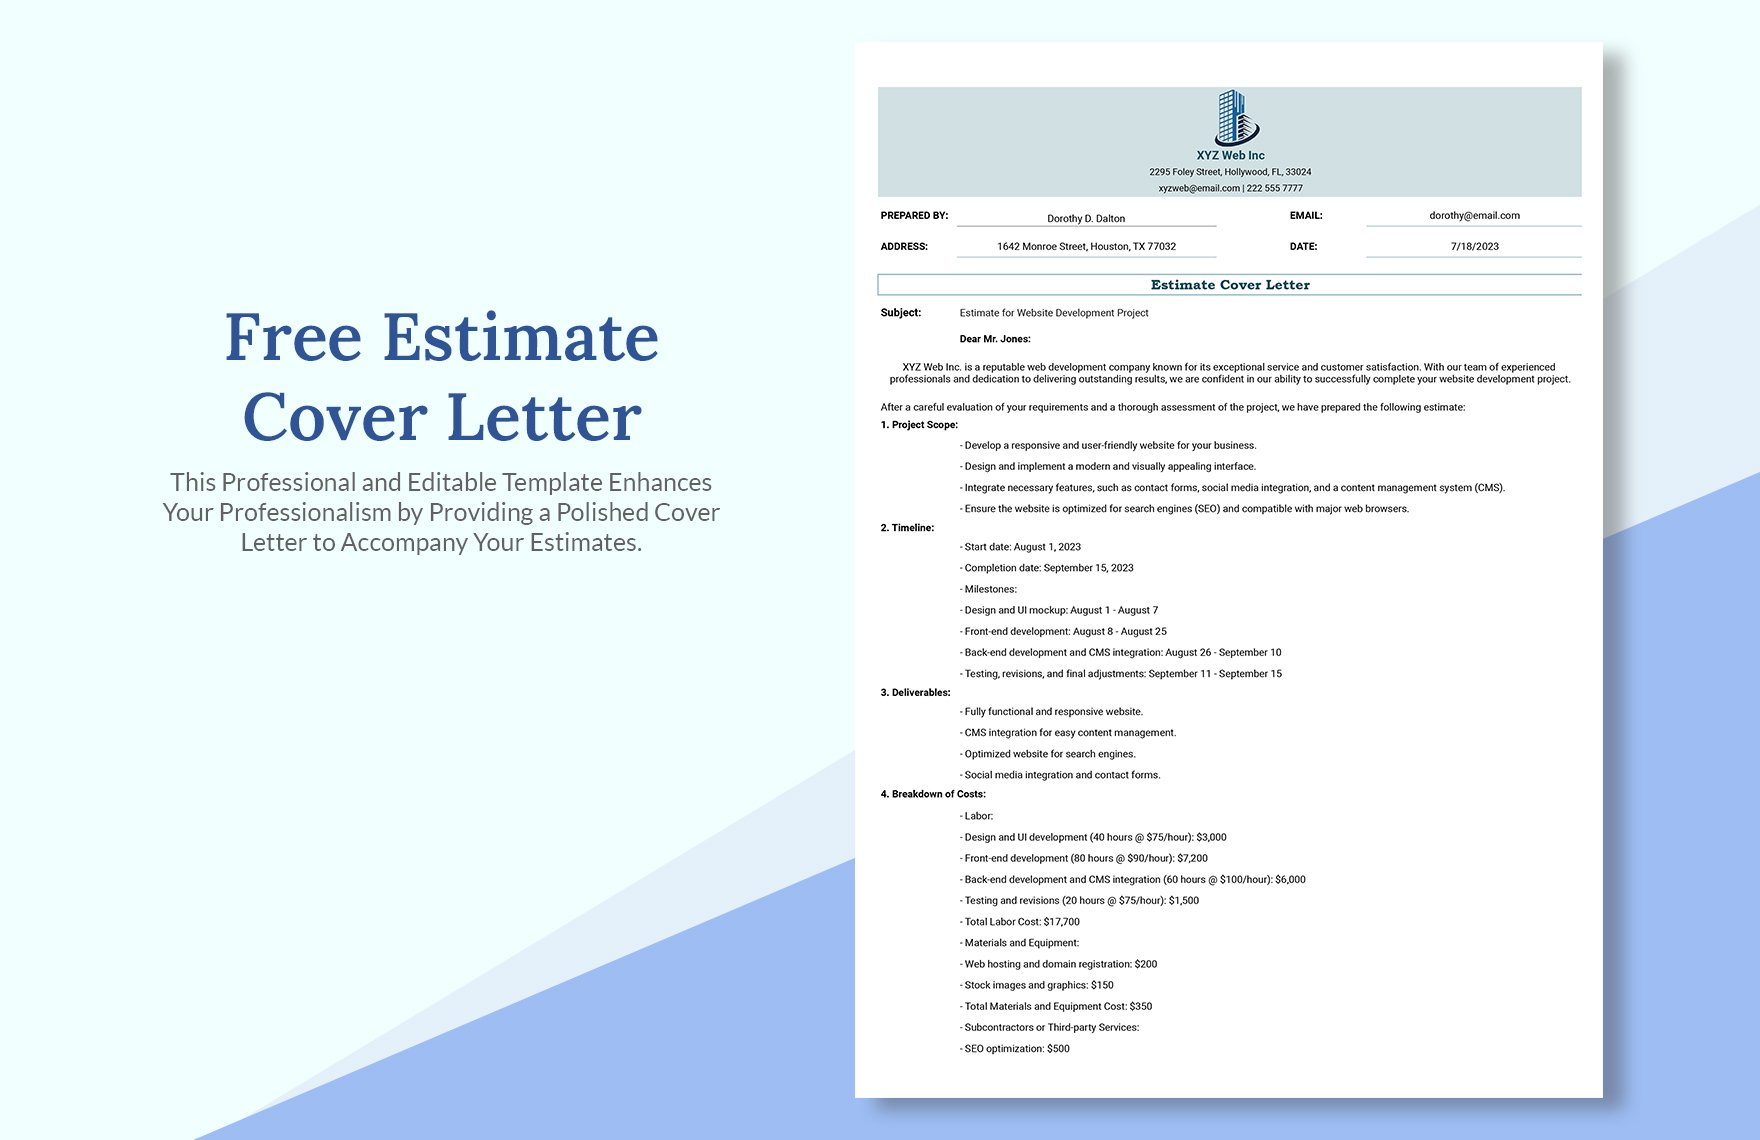 Free Estimate Cover Letter Template in Excel, Google Sheets